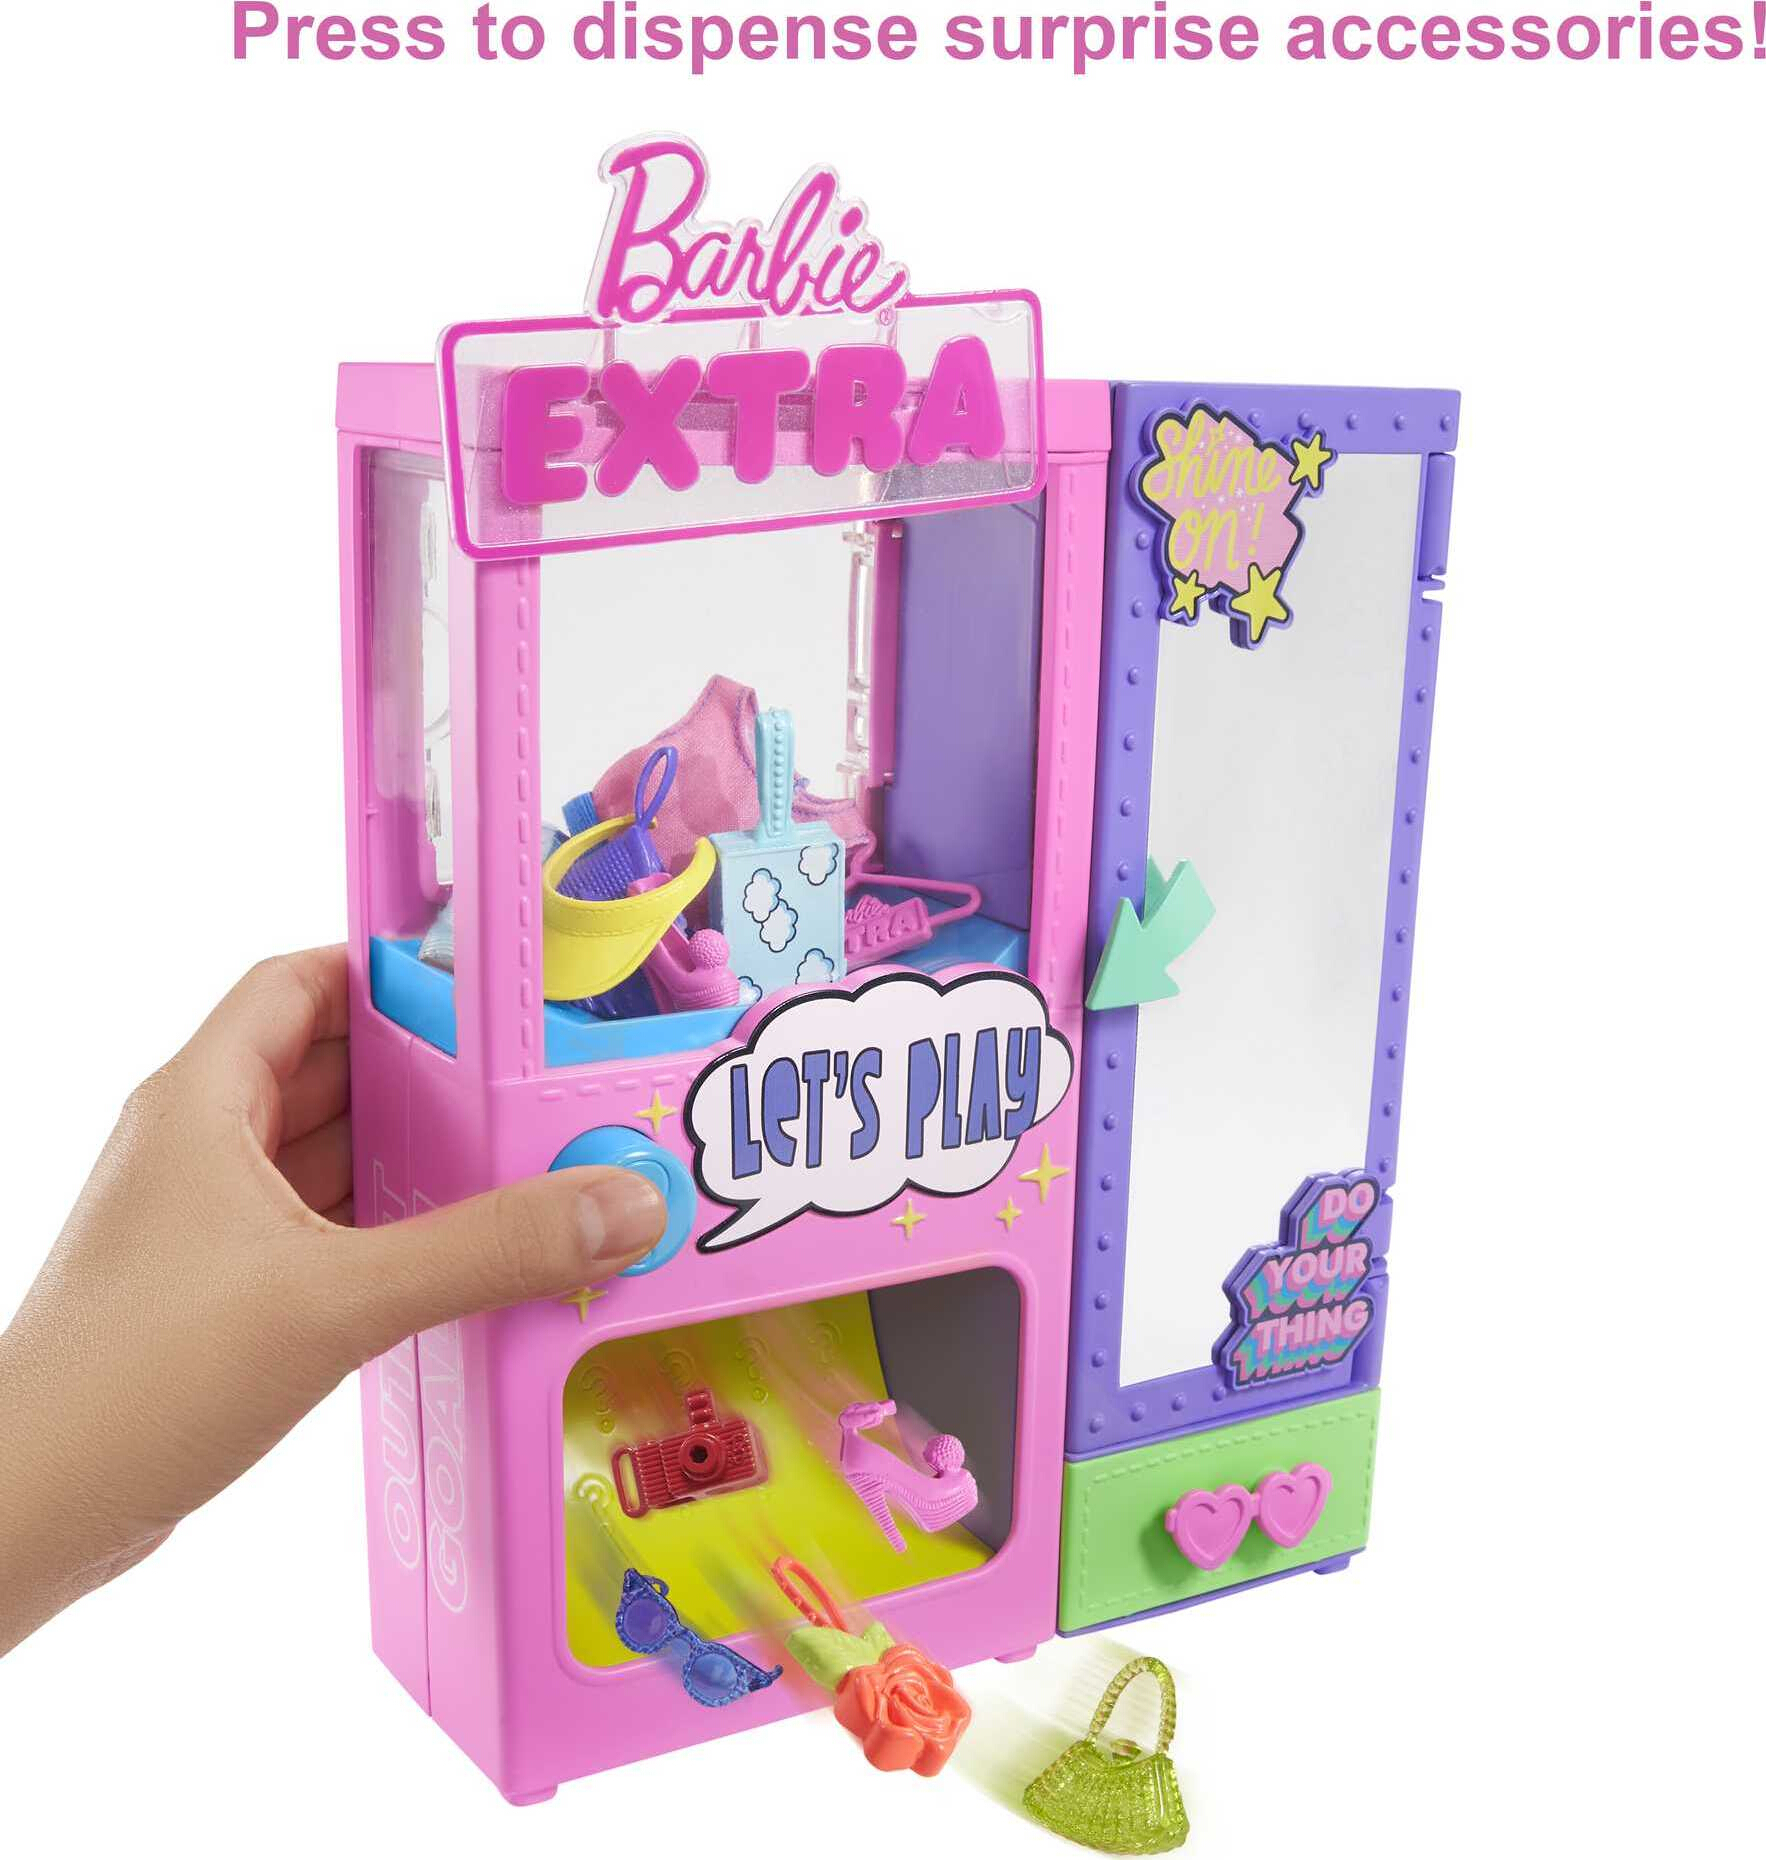 Barbie Extra Surprise Fashion Closet Playset with Pet & Accessories, 3 Year Olds & Up - image 4 of 7